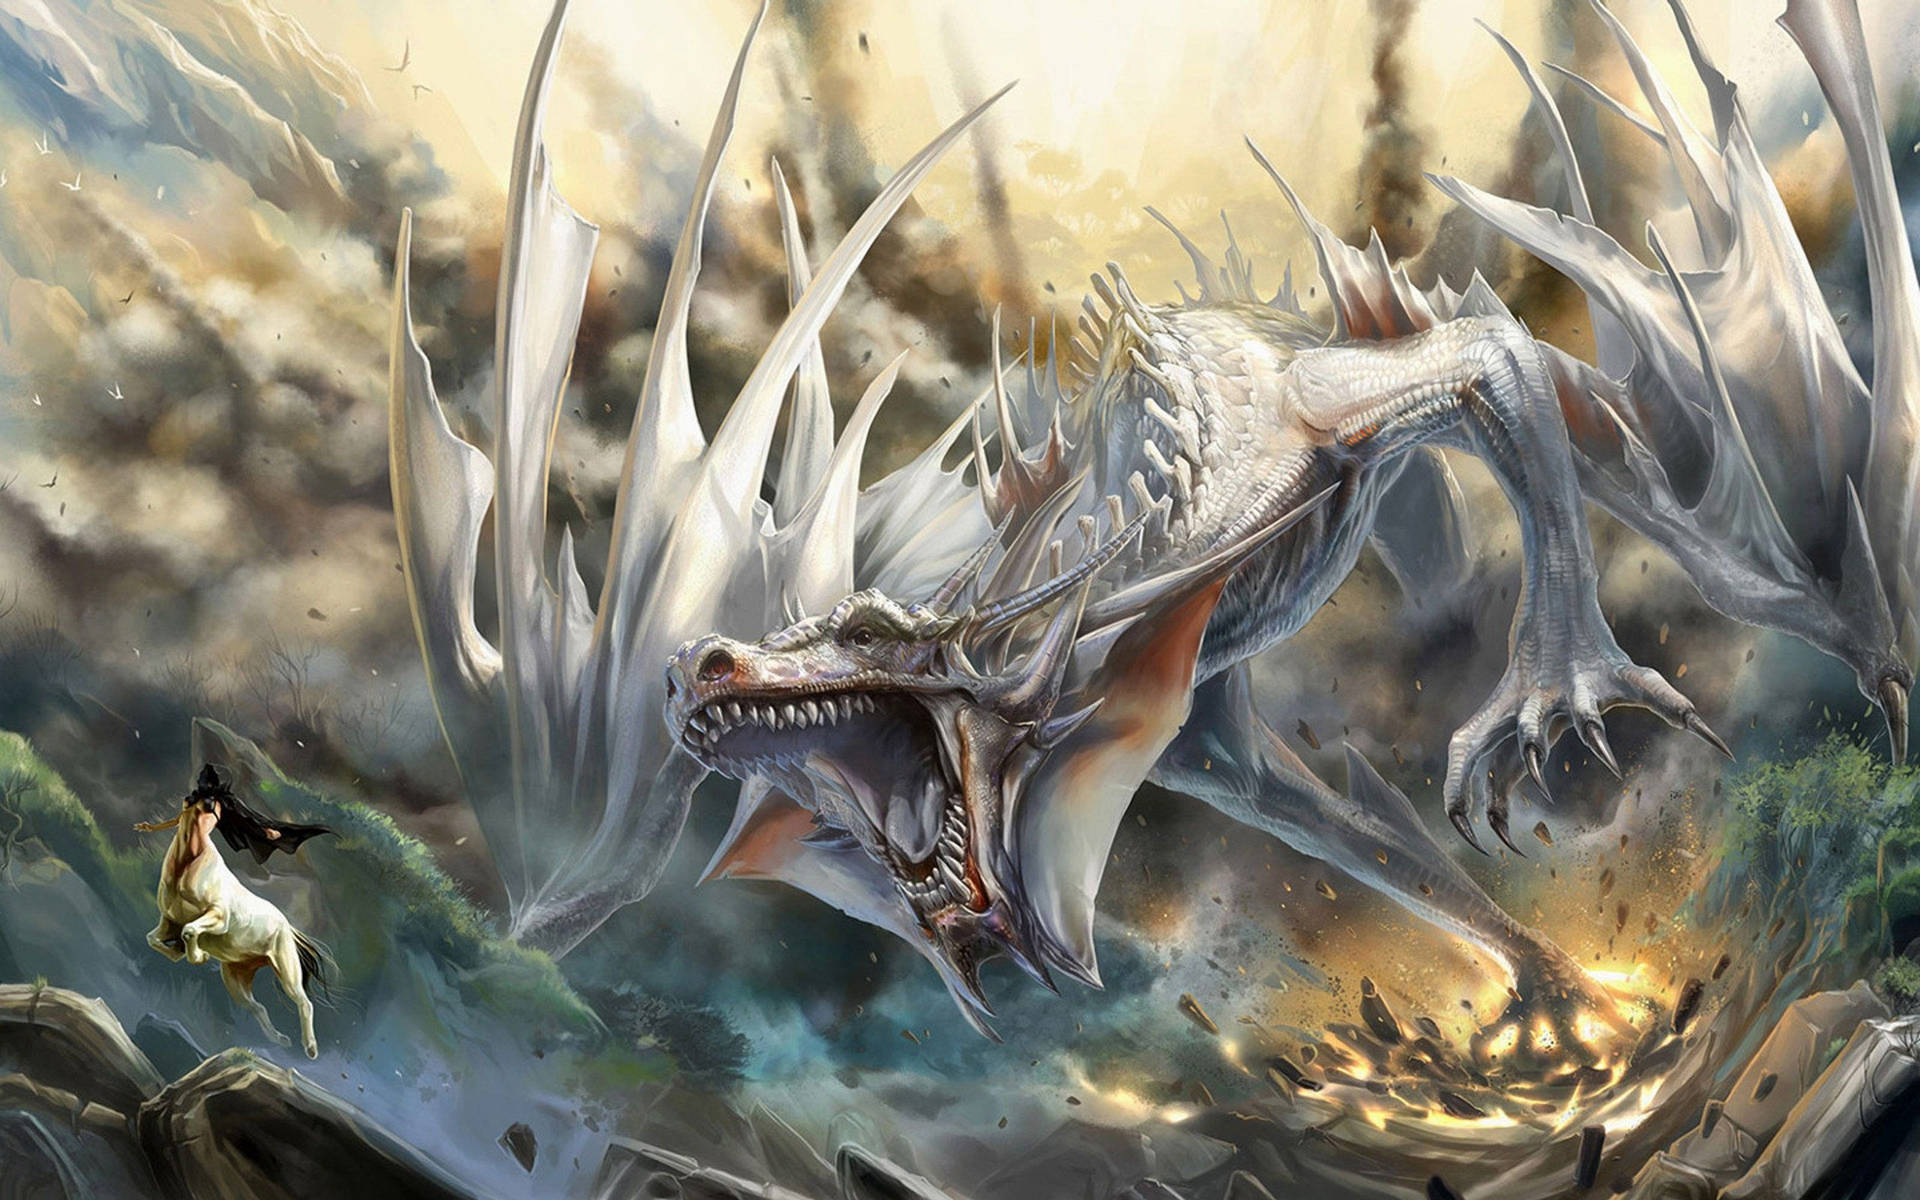 A Roaring White Dragon Snowstorms Across the Sky of Magic The Gathering Wallpaper